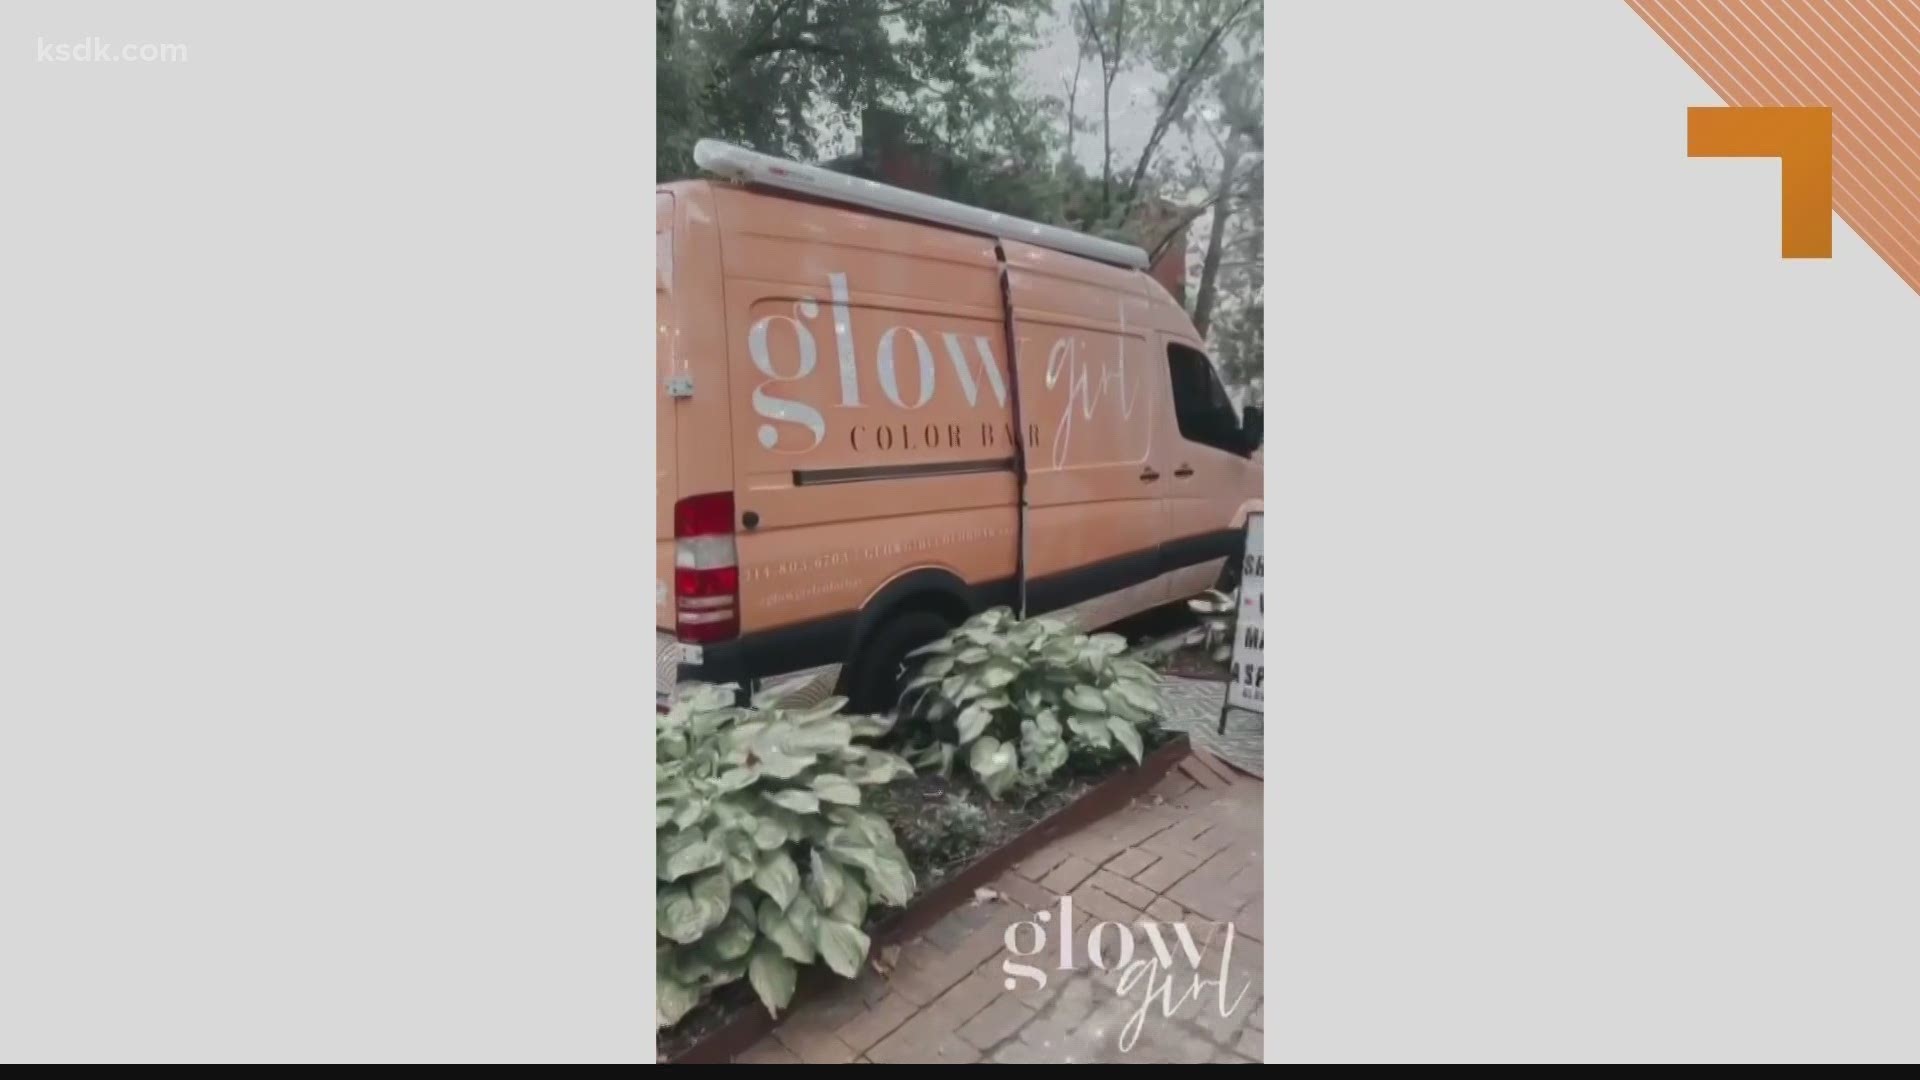 There are mobile tanning services that take the tents inside client’s homes, but Rowan has created an actual salon on wheels.